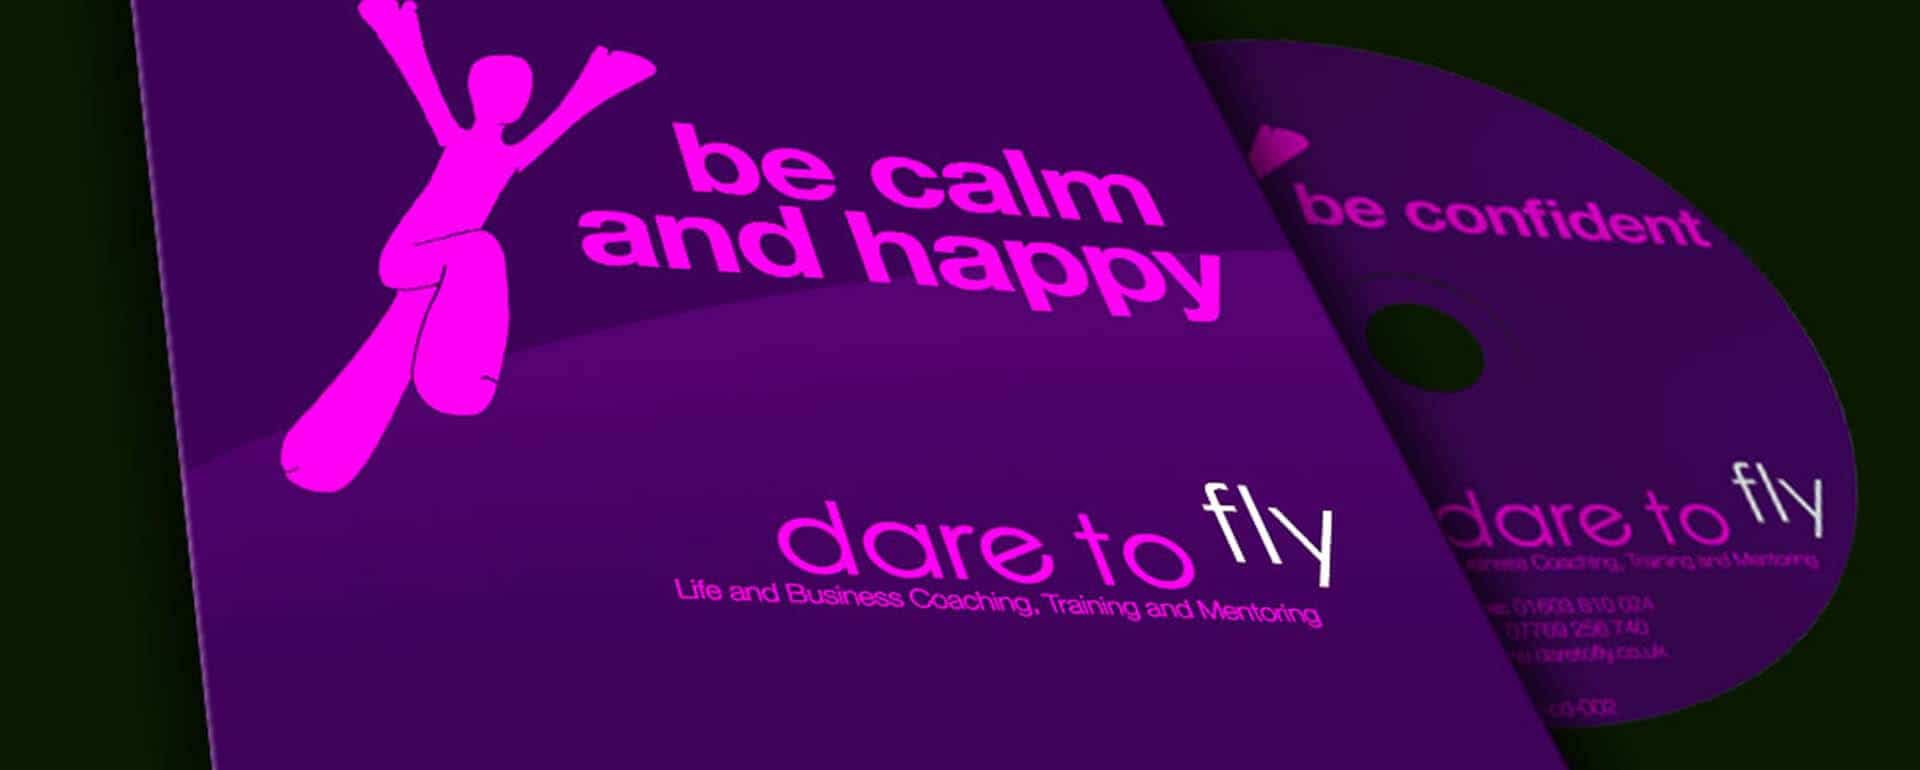 Dare to Fly CDs